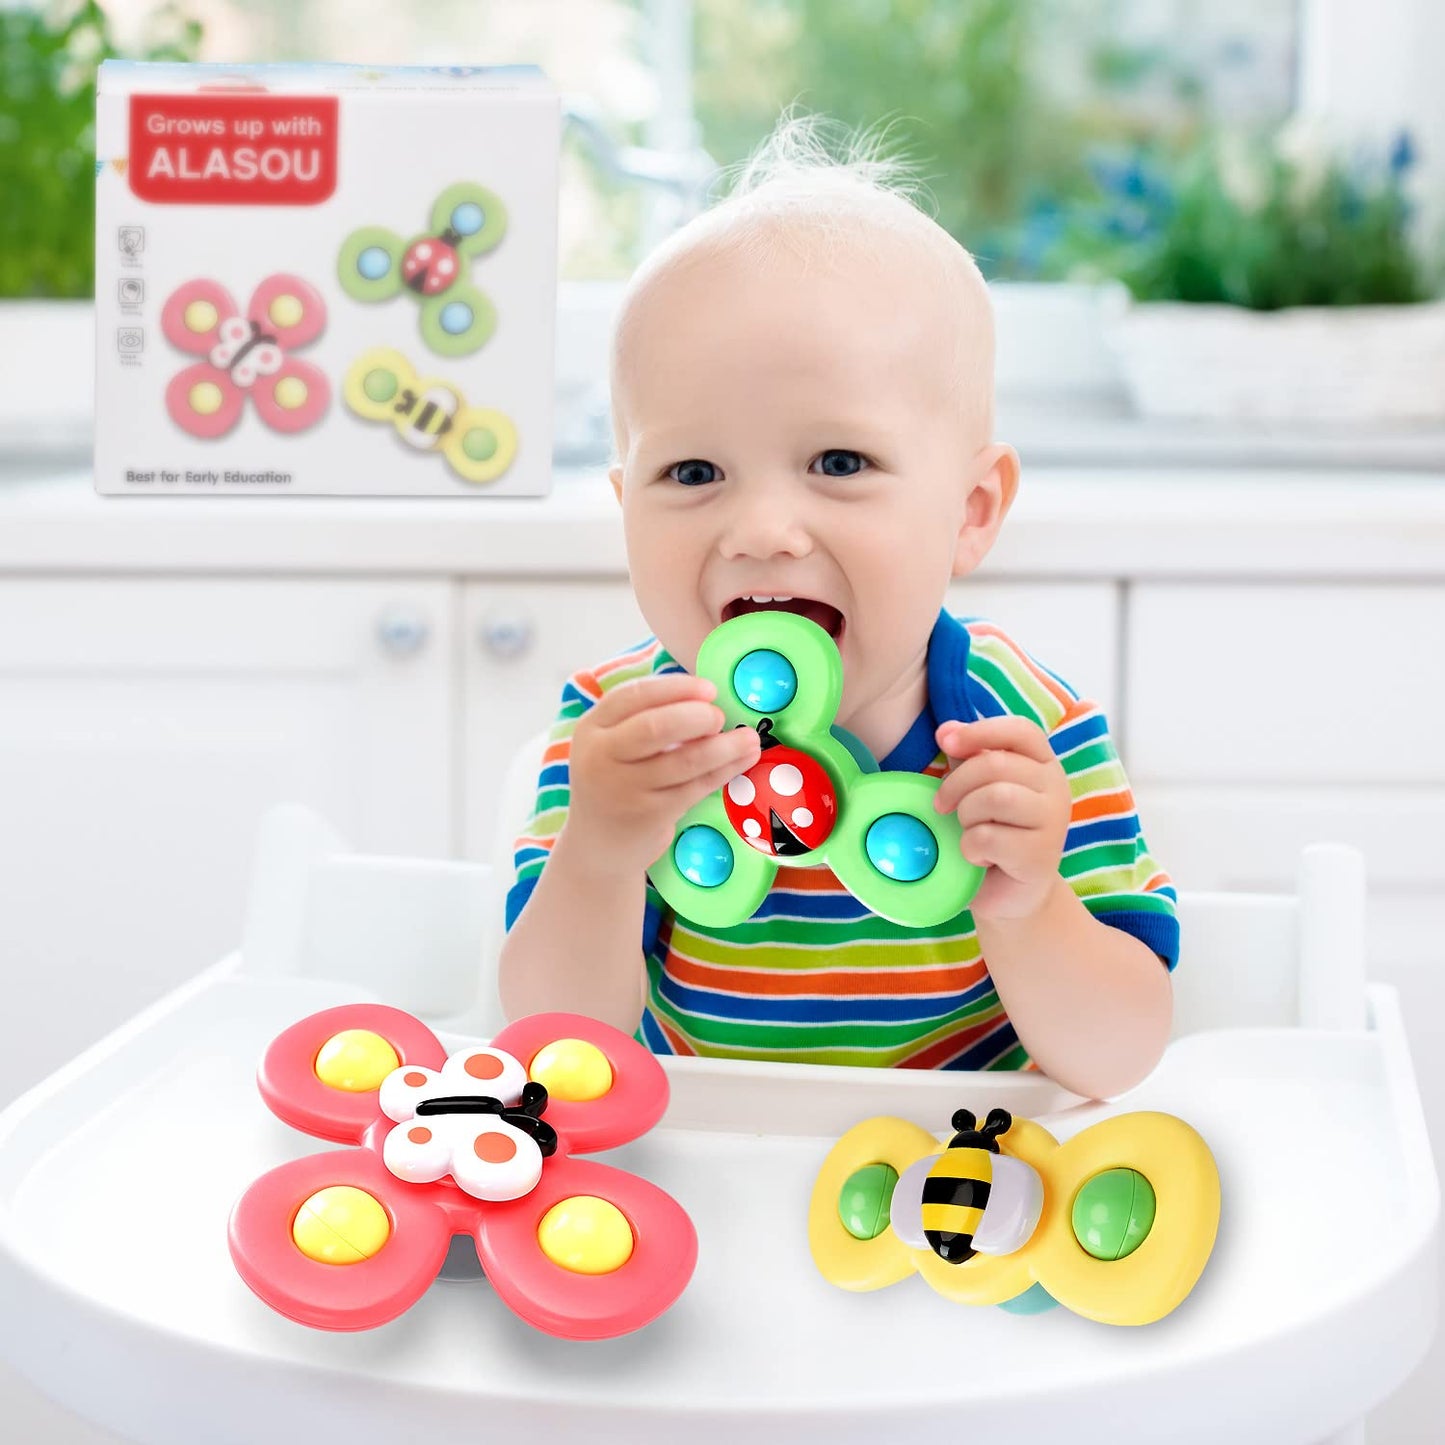 3PCS ALASOU Suction Cup Spinner Toys for 1 Year Old Boy Girl|Spinning Top Toddler Toys Age 1-2|1 2 Year Old Boy Birthday Gift|Baby Bath Toys for Kids Ages 1-3|Sensory Toys for Toddlers 1-3